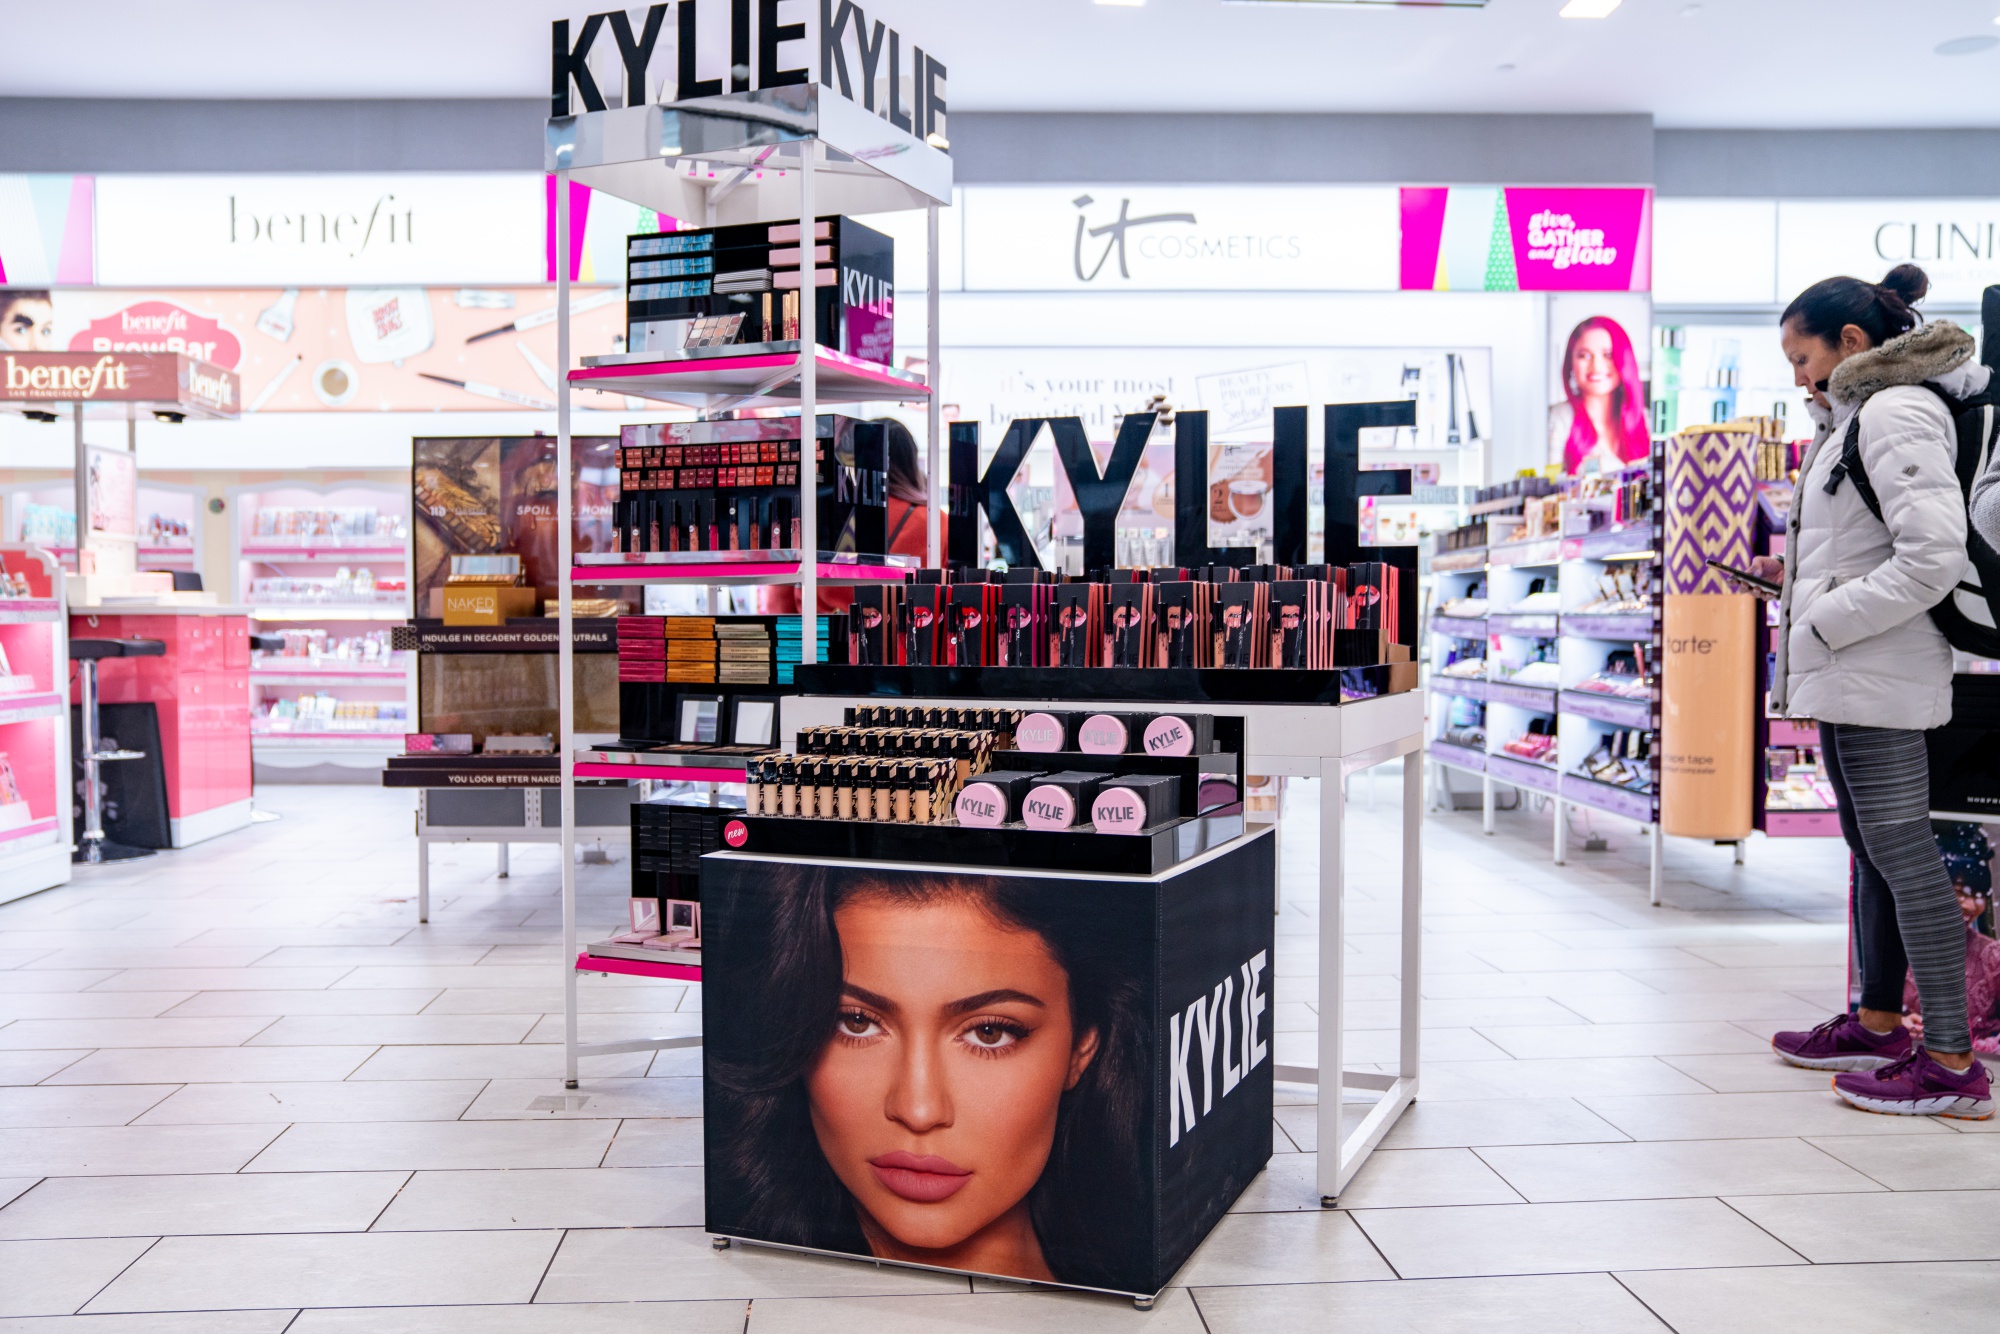 Kylie Jenner Coty Can Pout Over Covid Lipstick Sales Slump Bloomberg